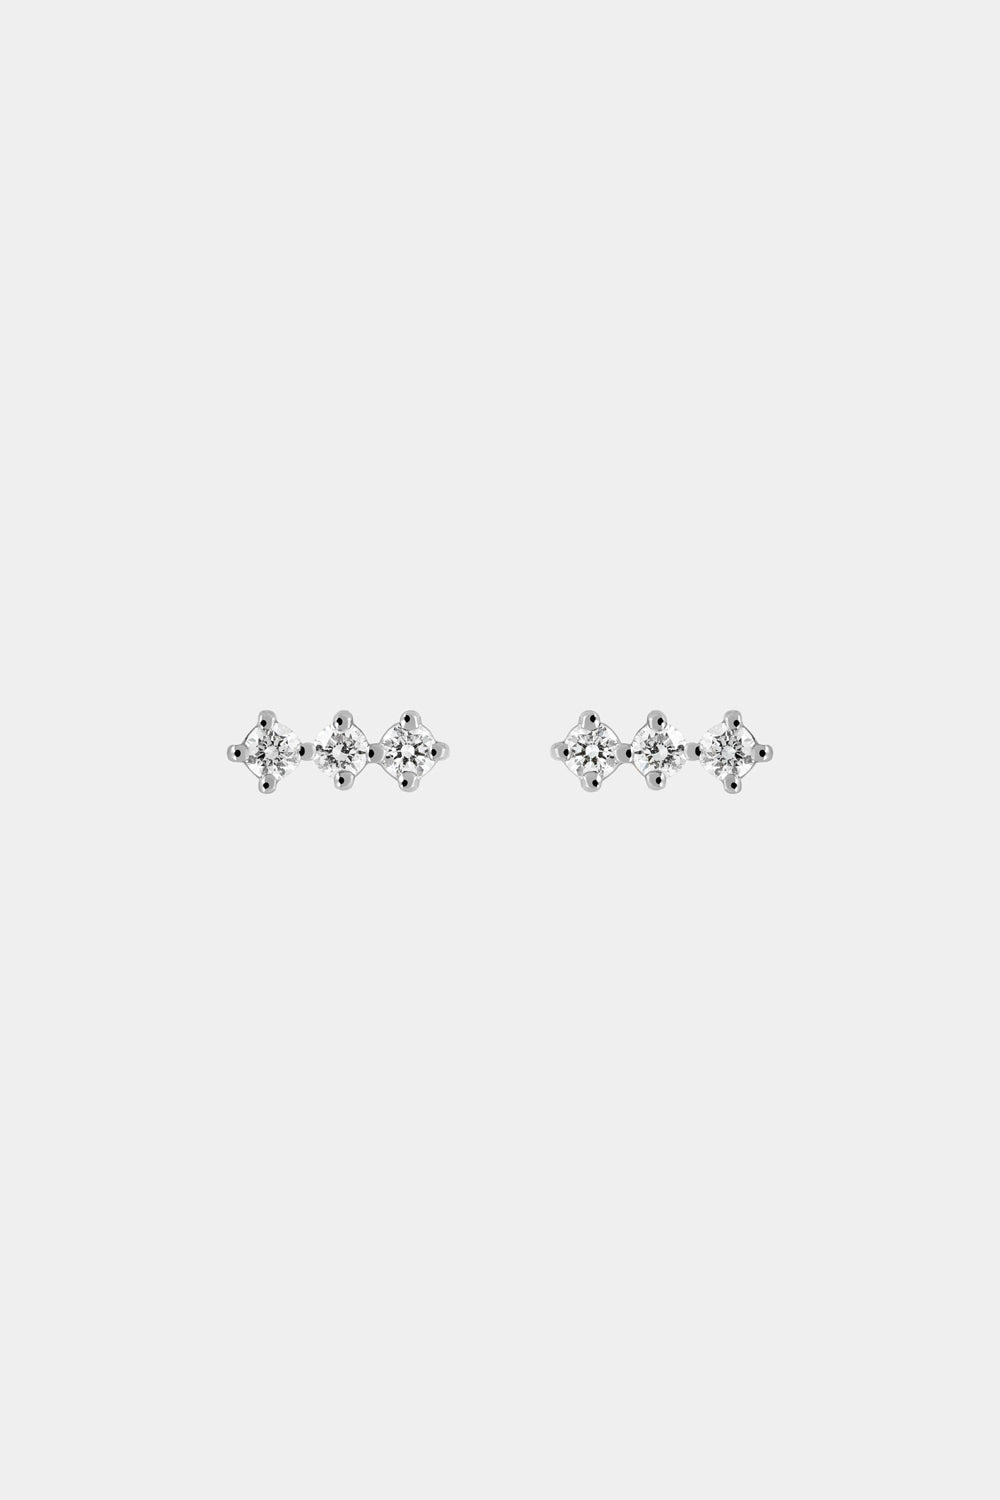 Buttercup Diamond Bar Earrings | White Gold, More Options Available